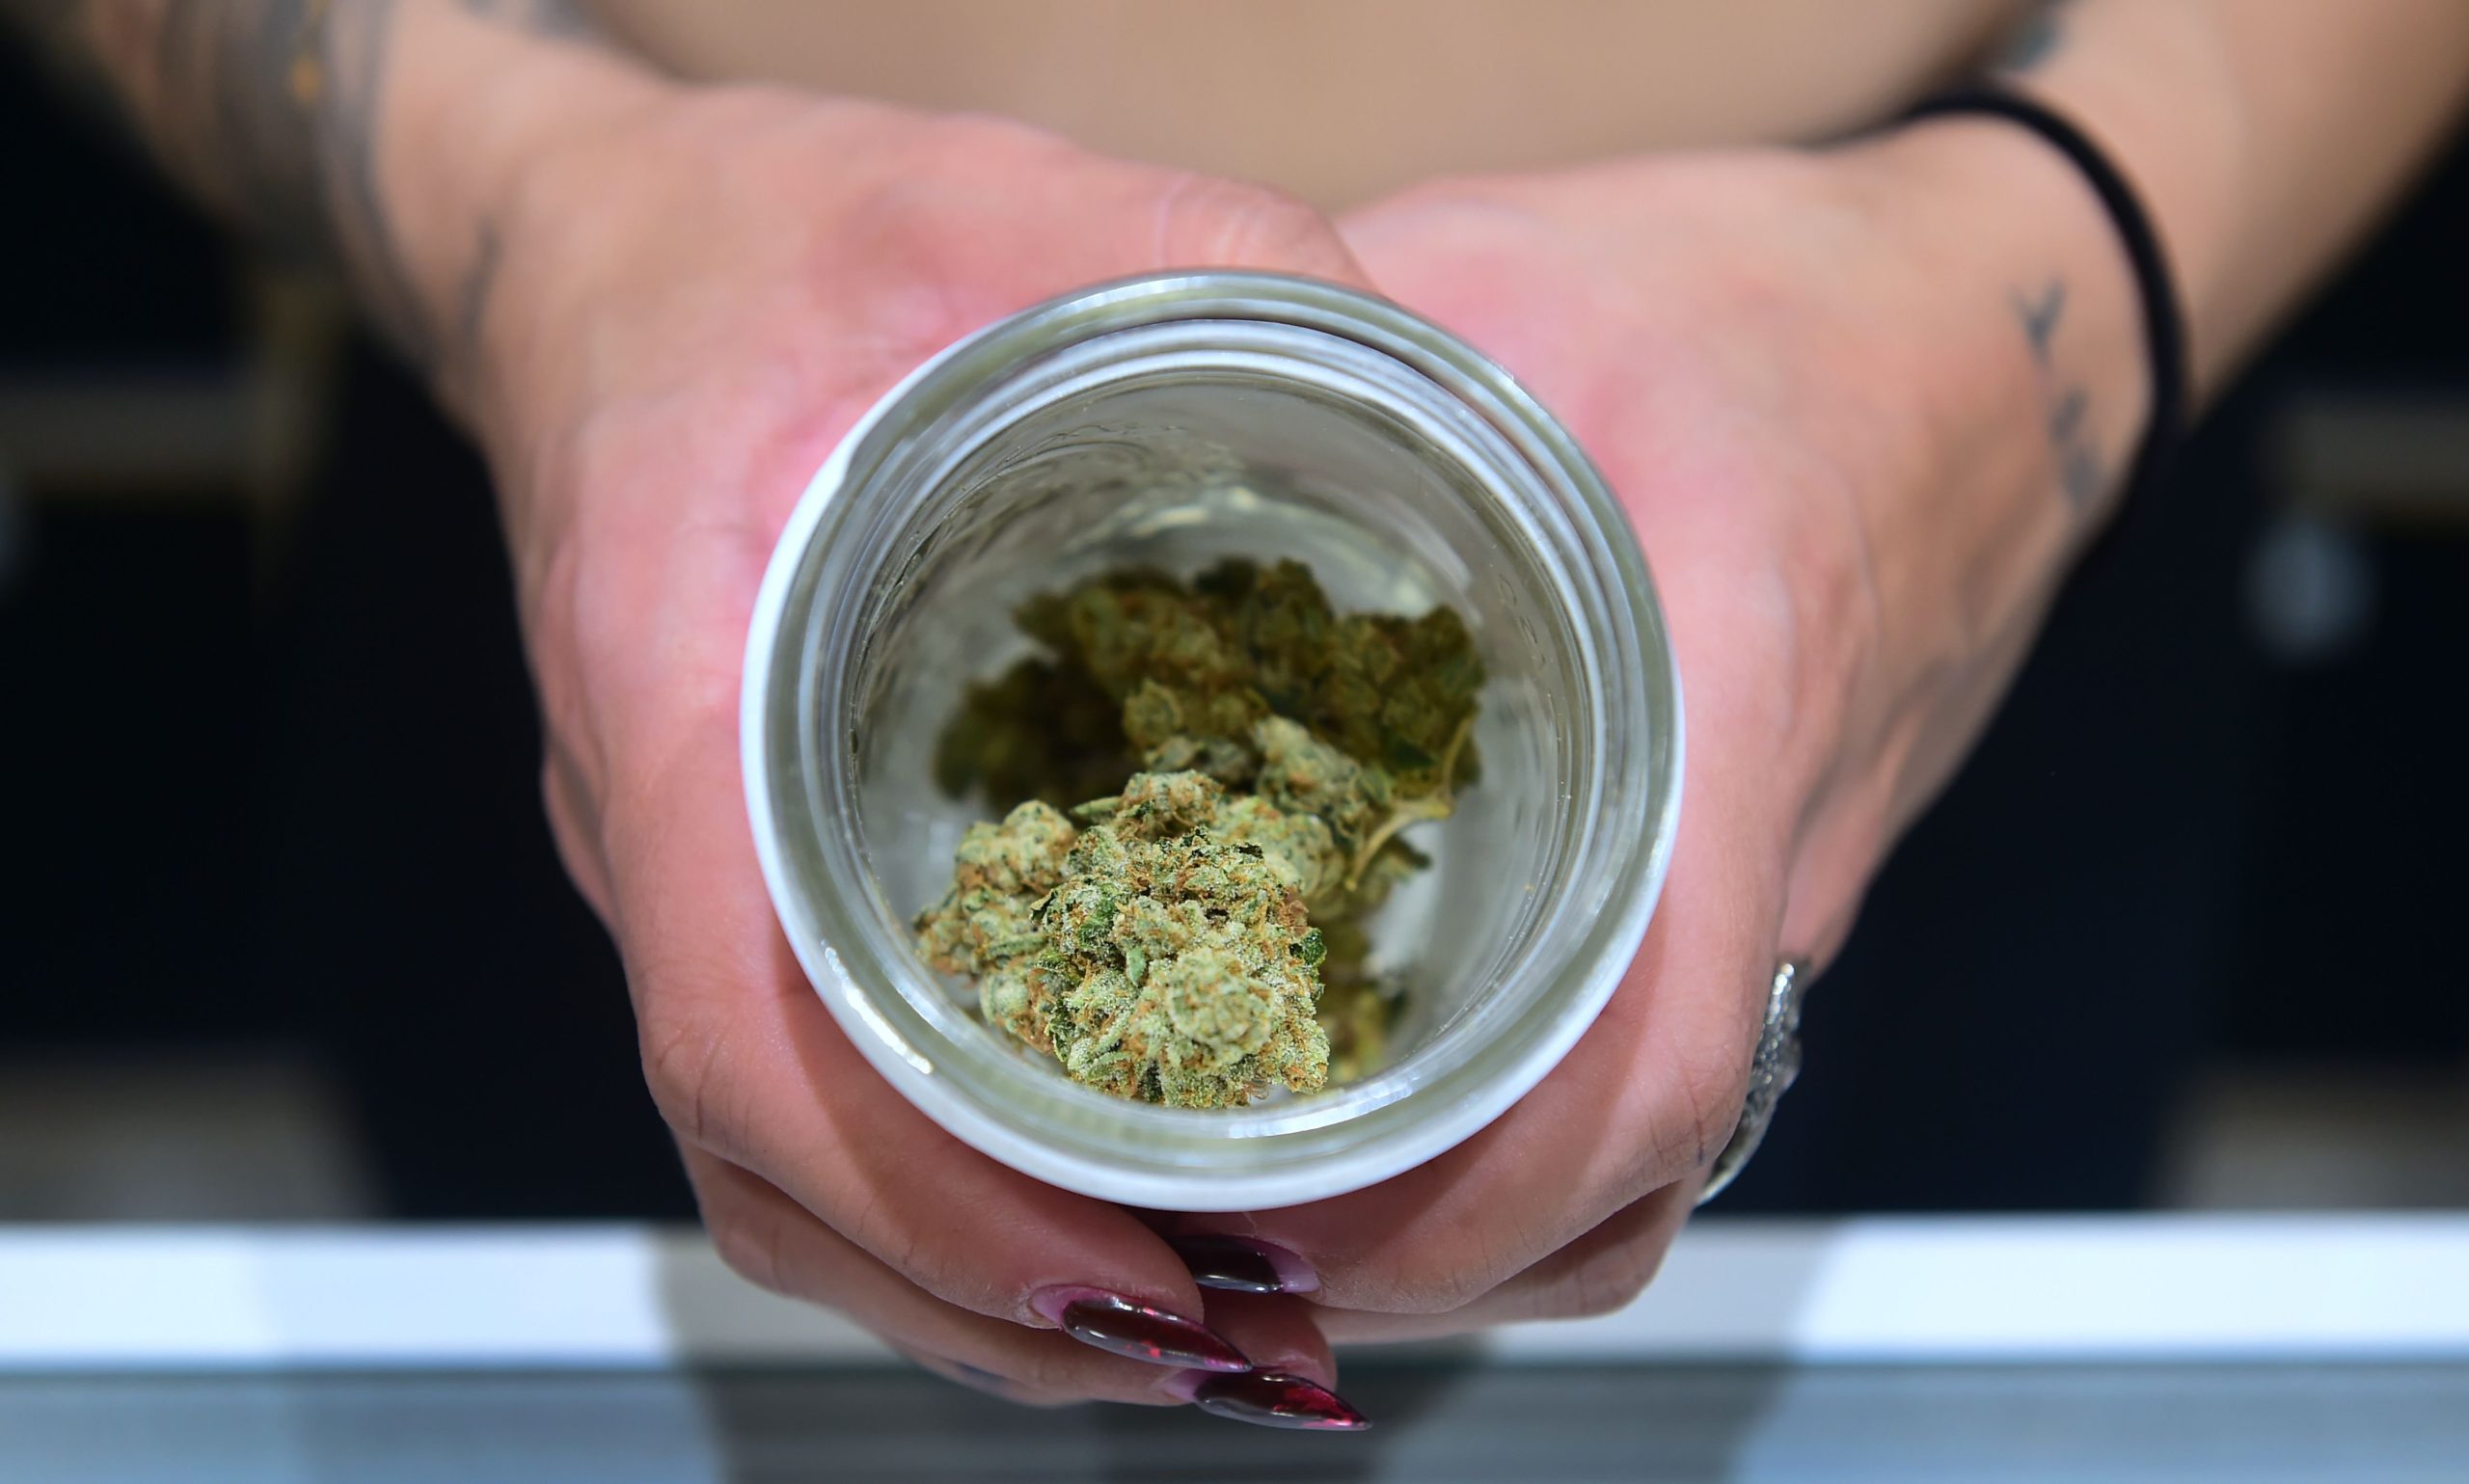 The Legal Marijuana Market Is Catching Up to Beer and Wine